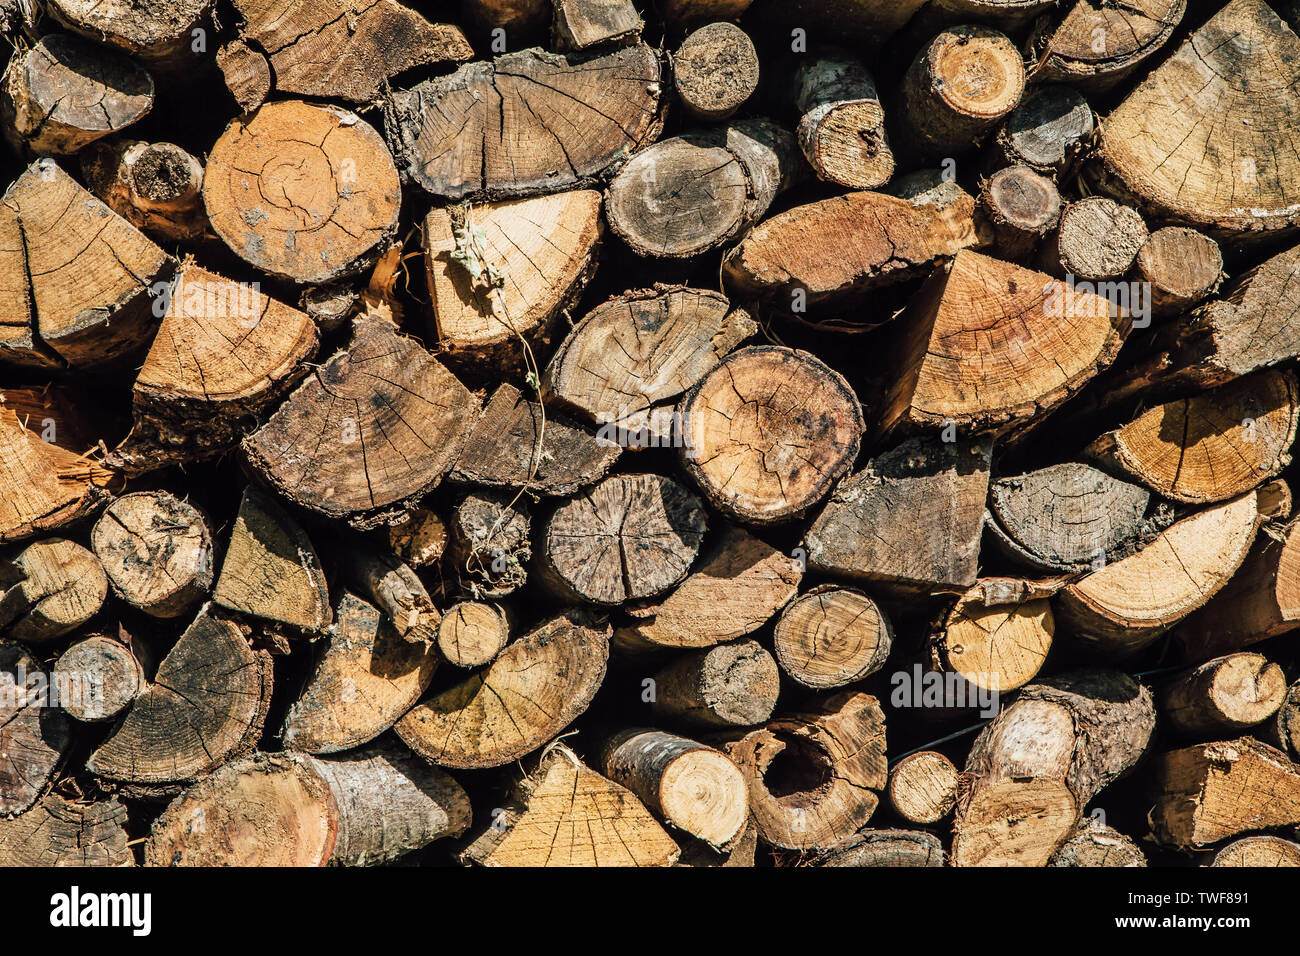 Wood Pile Stacked Logs Stock Photo